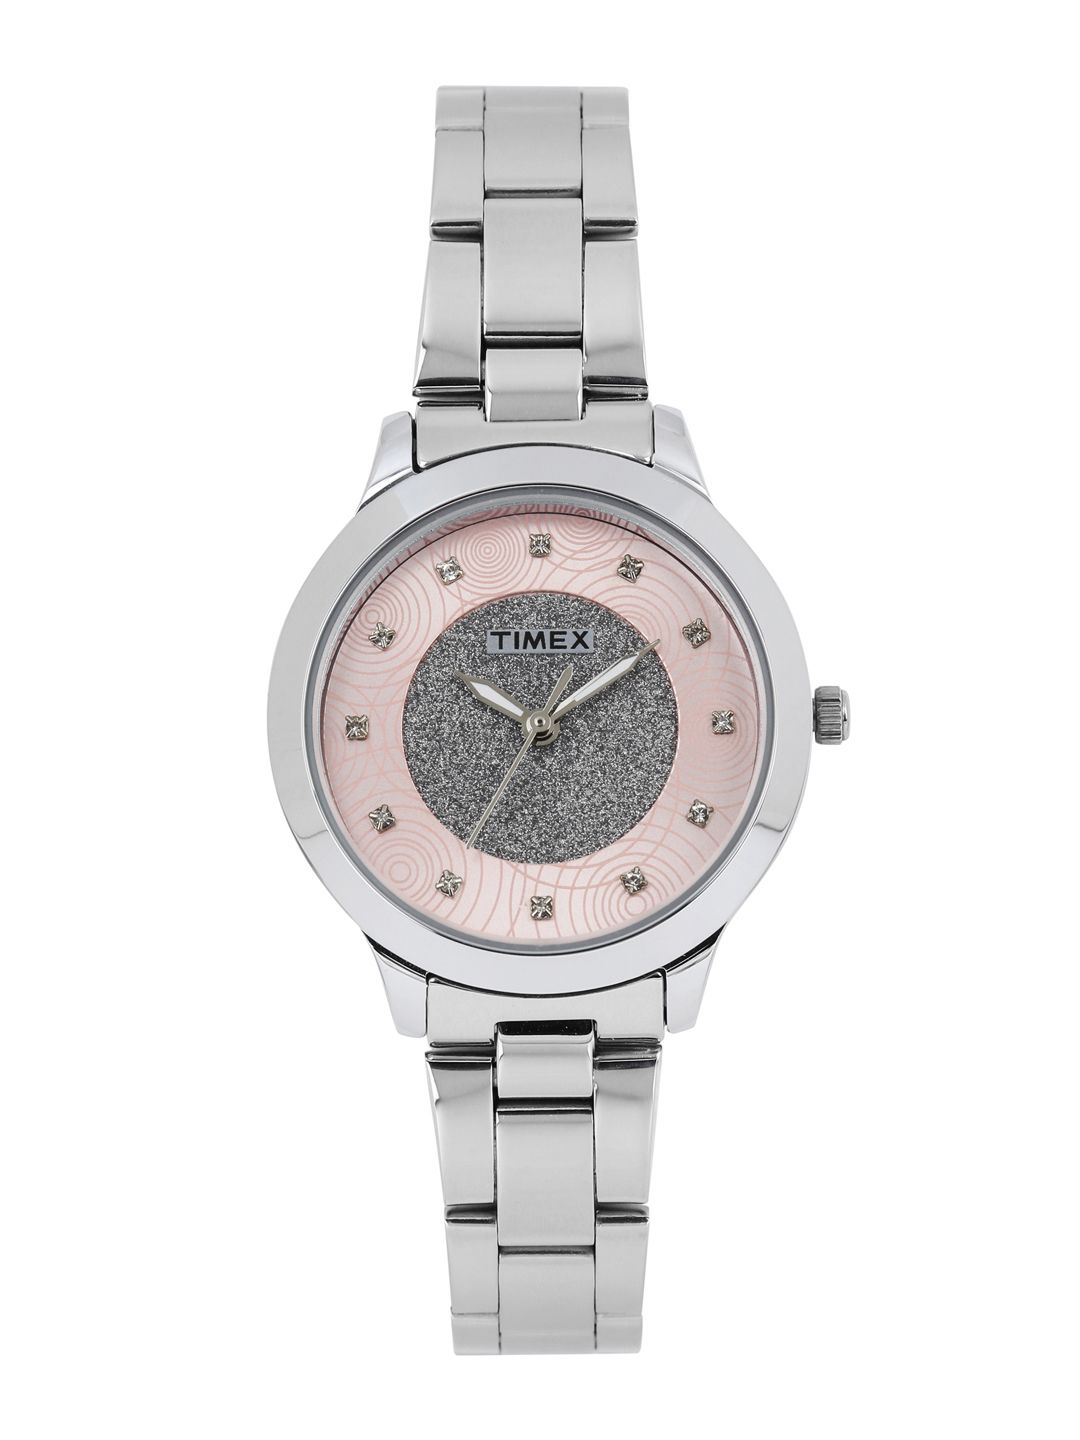 Timex Women Pink Analogue Watch - TW000T613 Price in India